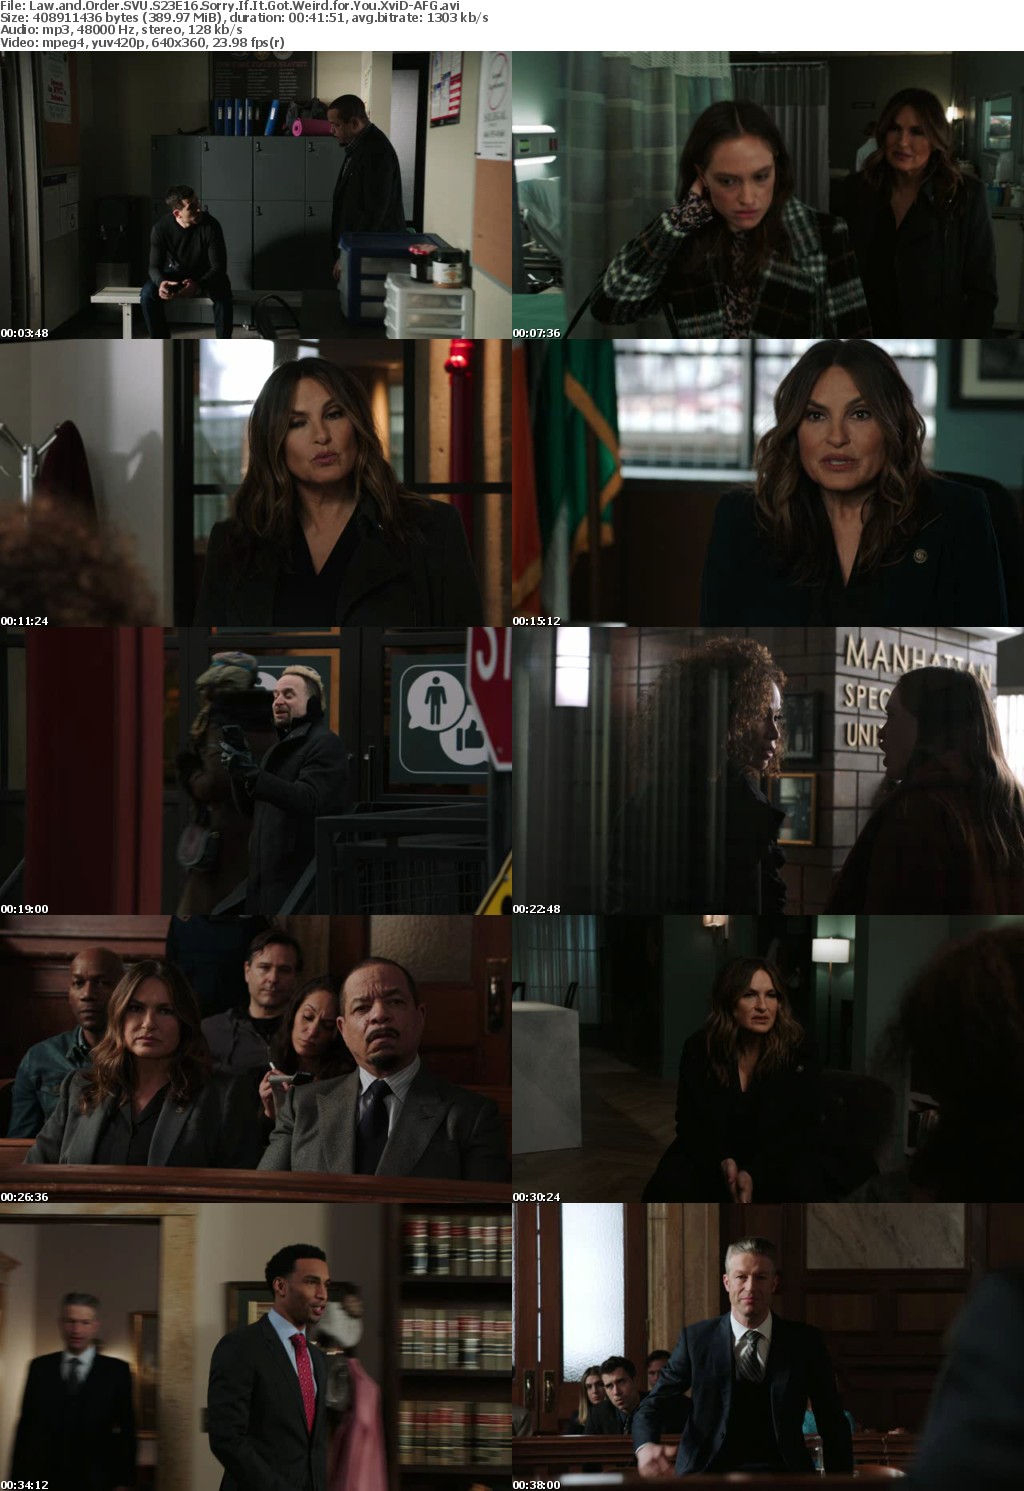 Law and Order SVU S23E16 Sorry If It Got Weird for You XviD-AFG